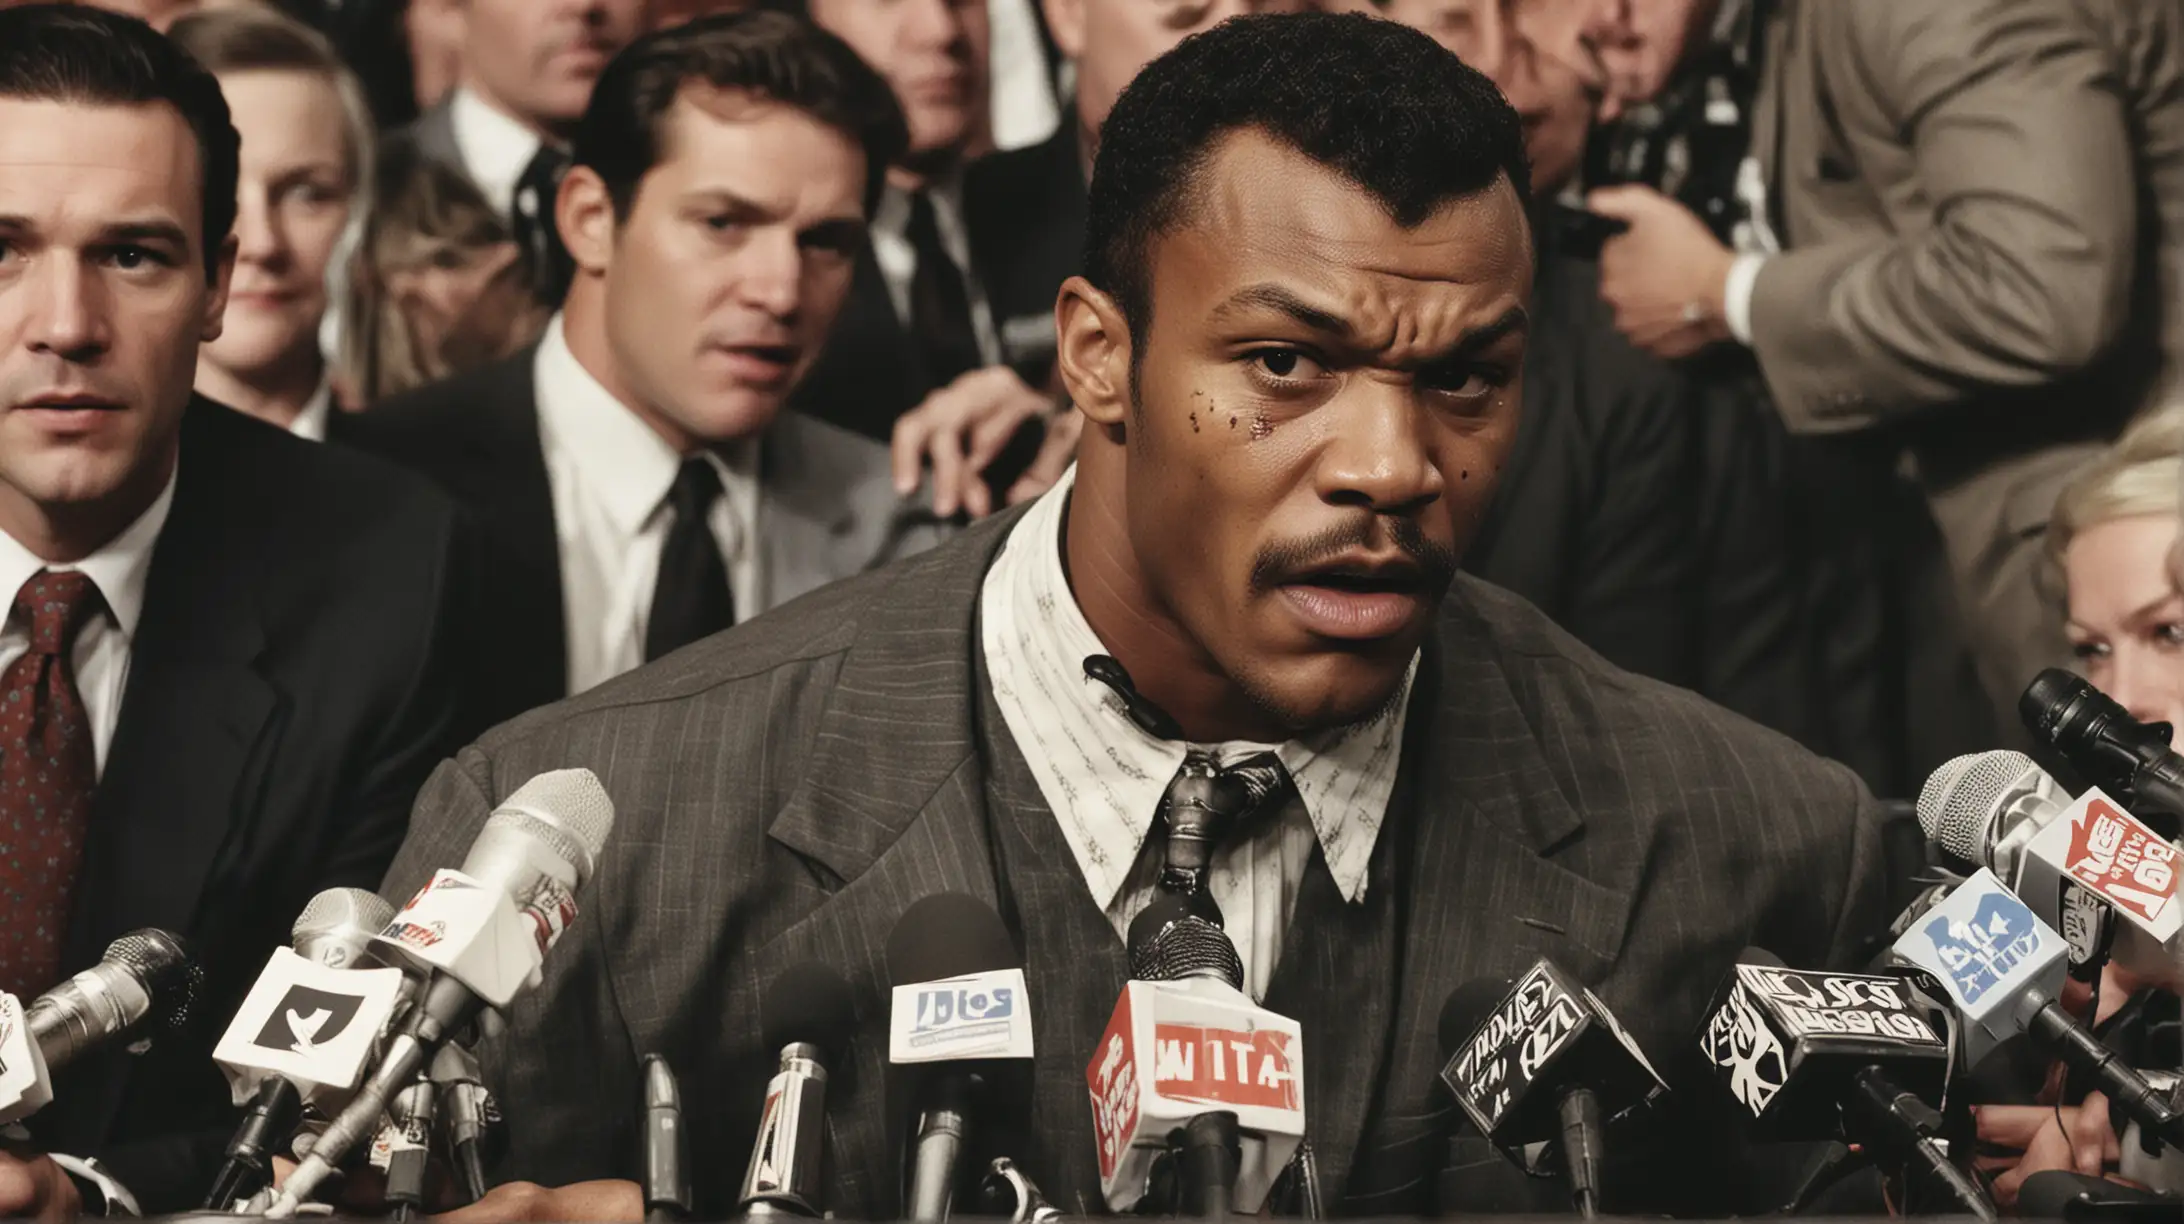 Mike Tyson Press Conference Tense Moment in Boxers Career